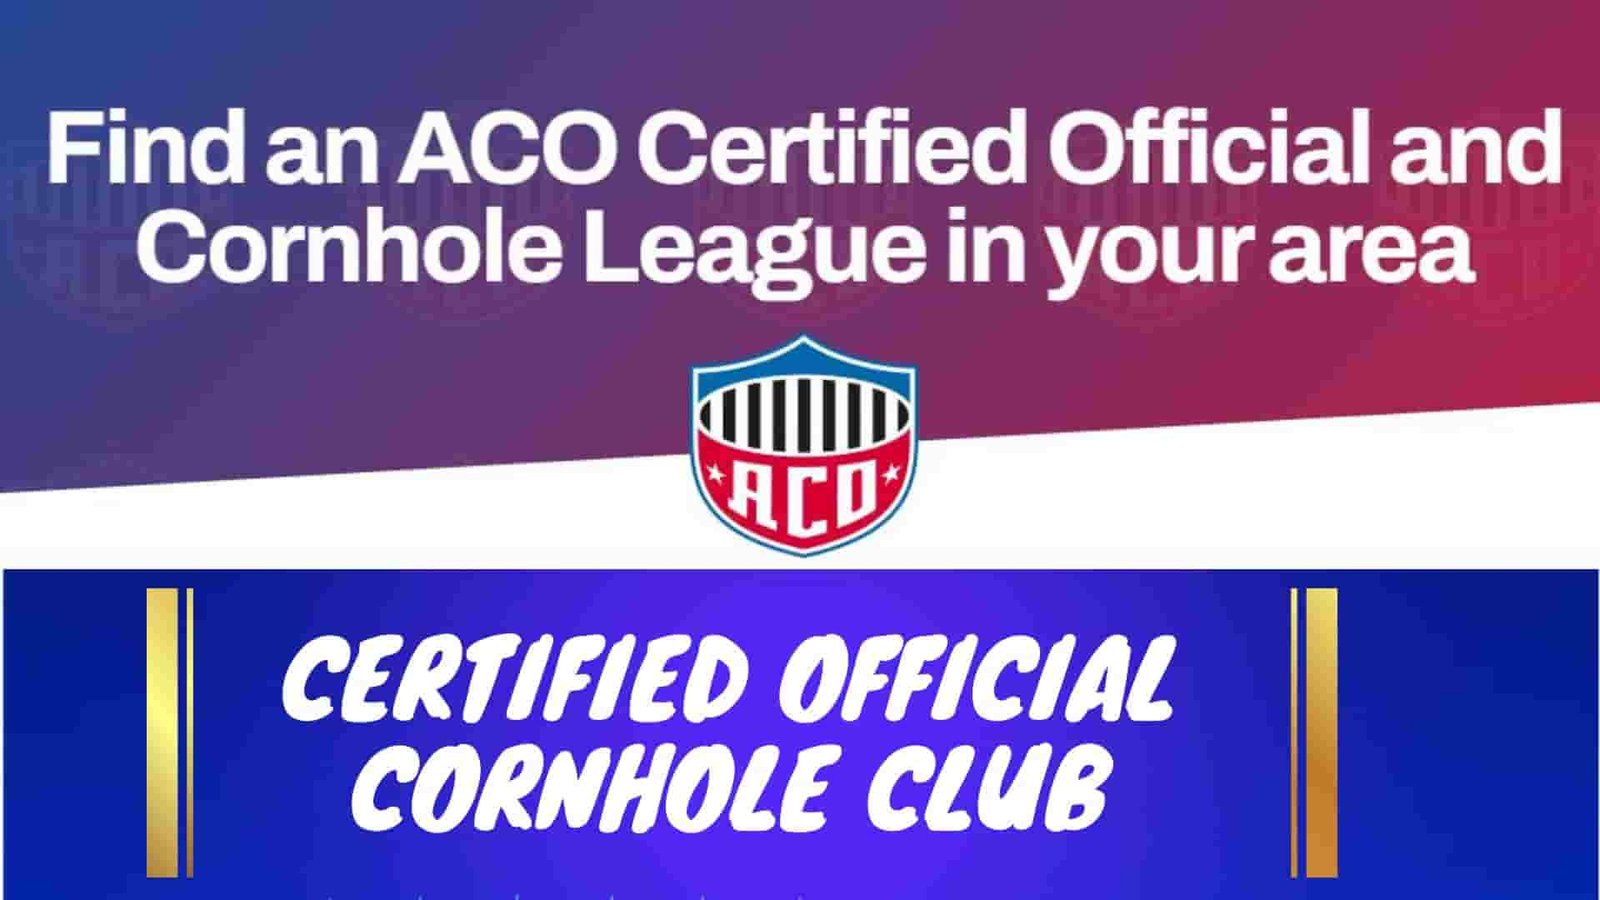 Find Your Local Certified Official Cornhole Club